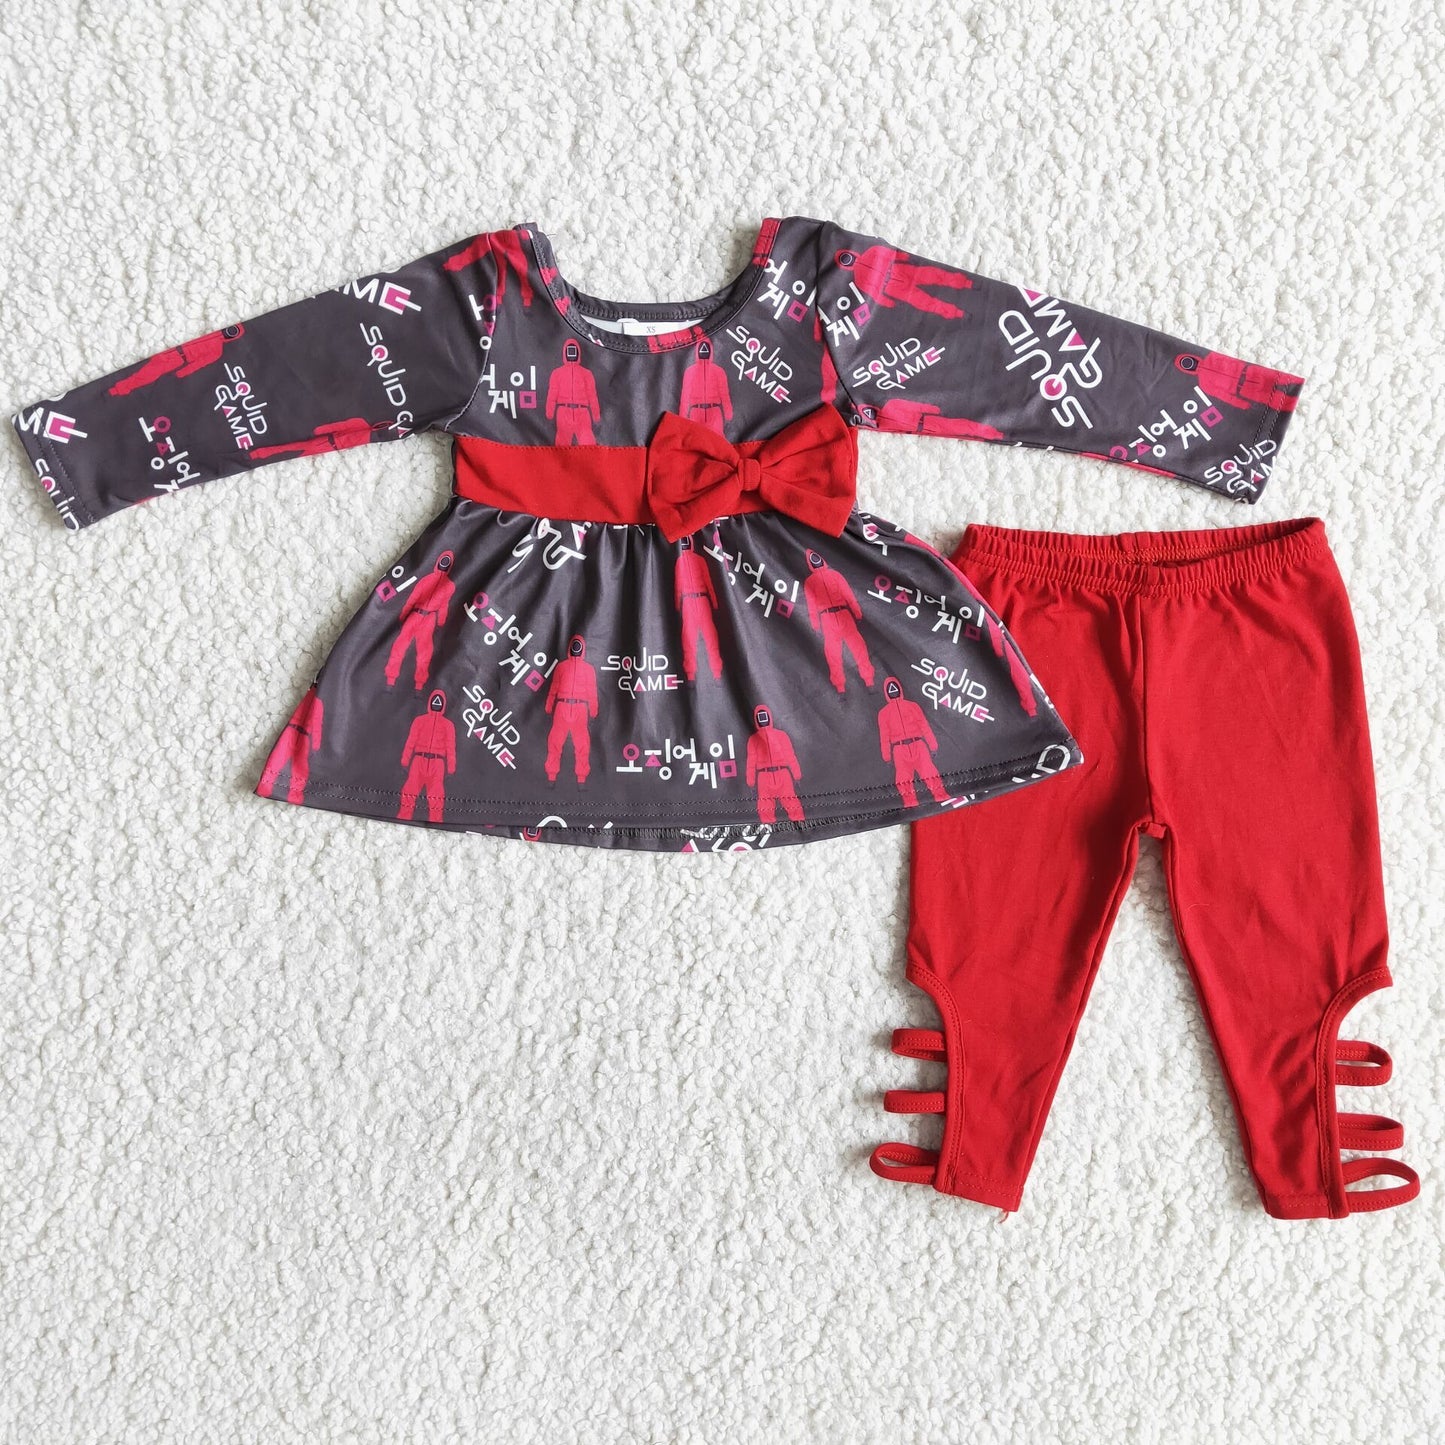 Red bow tunic match criss cross leggings girls boutique clothing